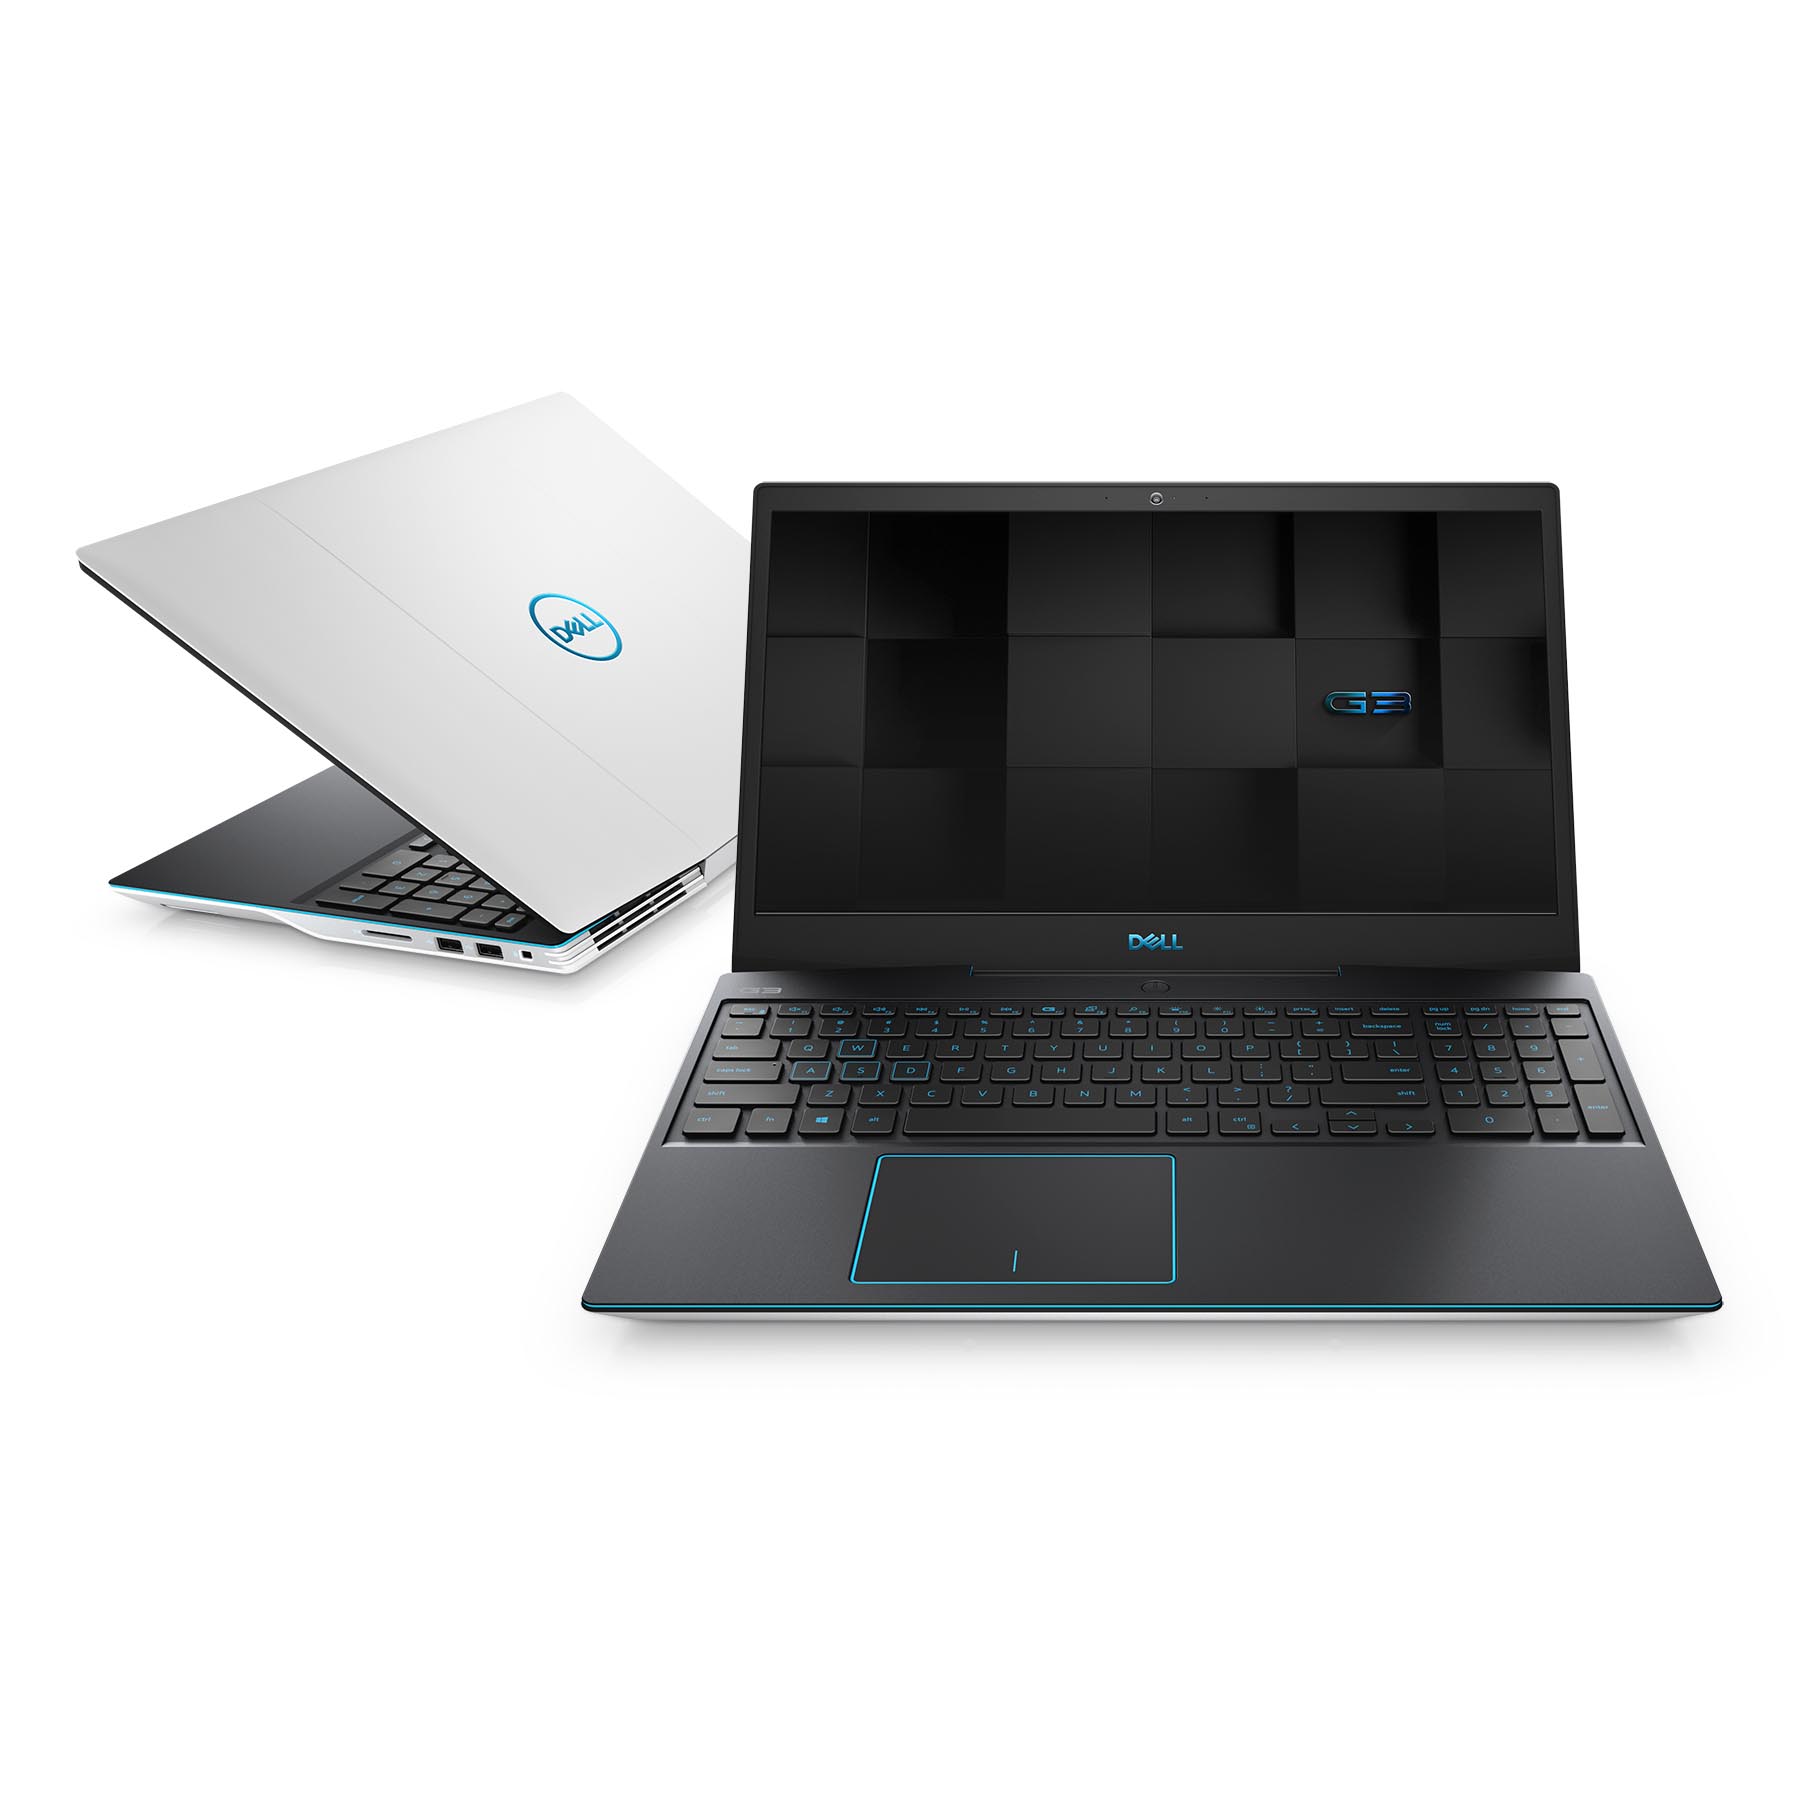 Computex 2019: Dell delivers more gaming power with Alienware 